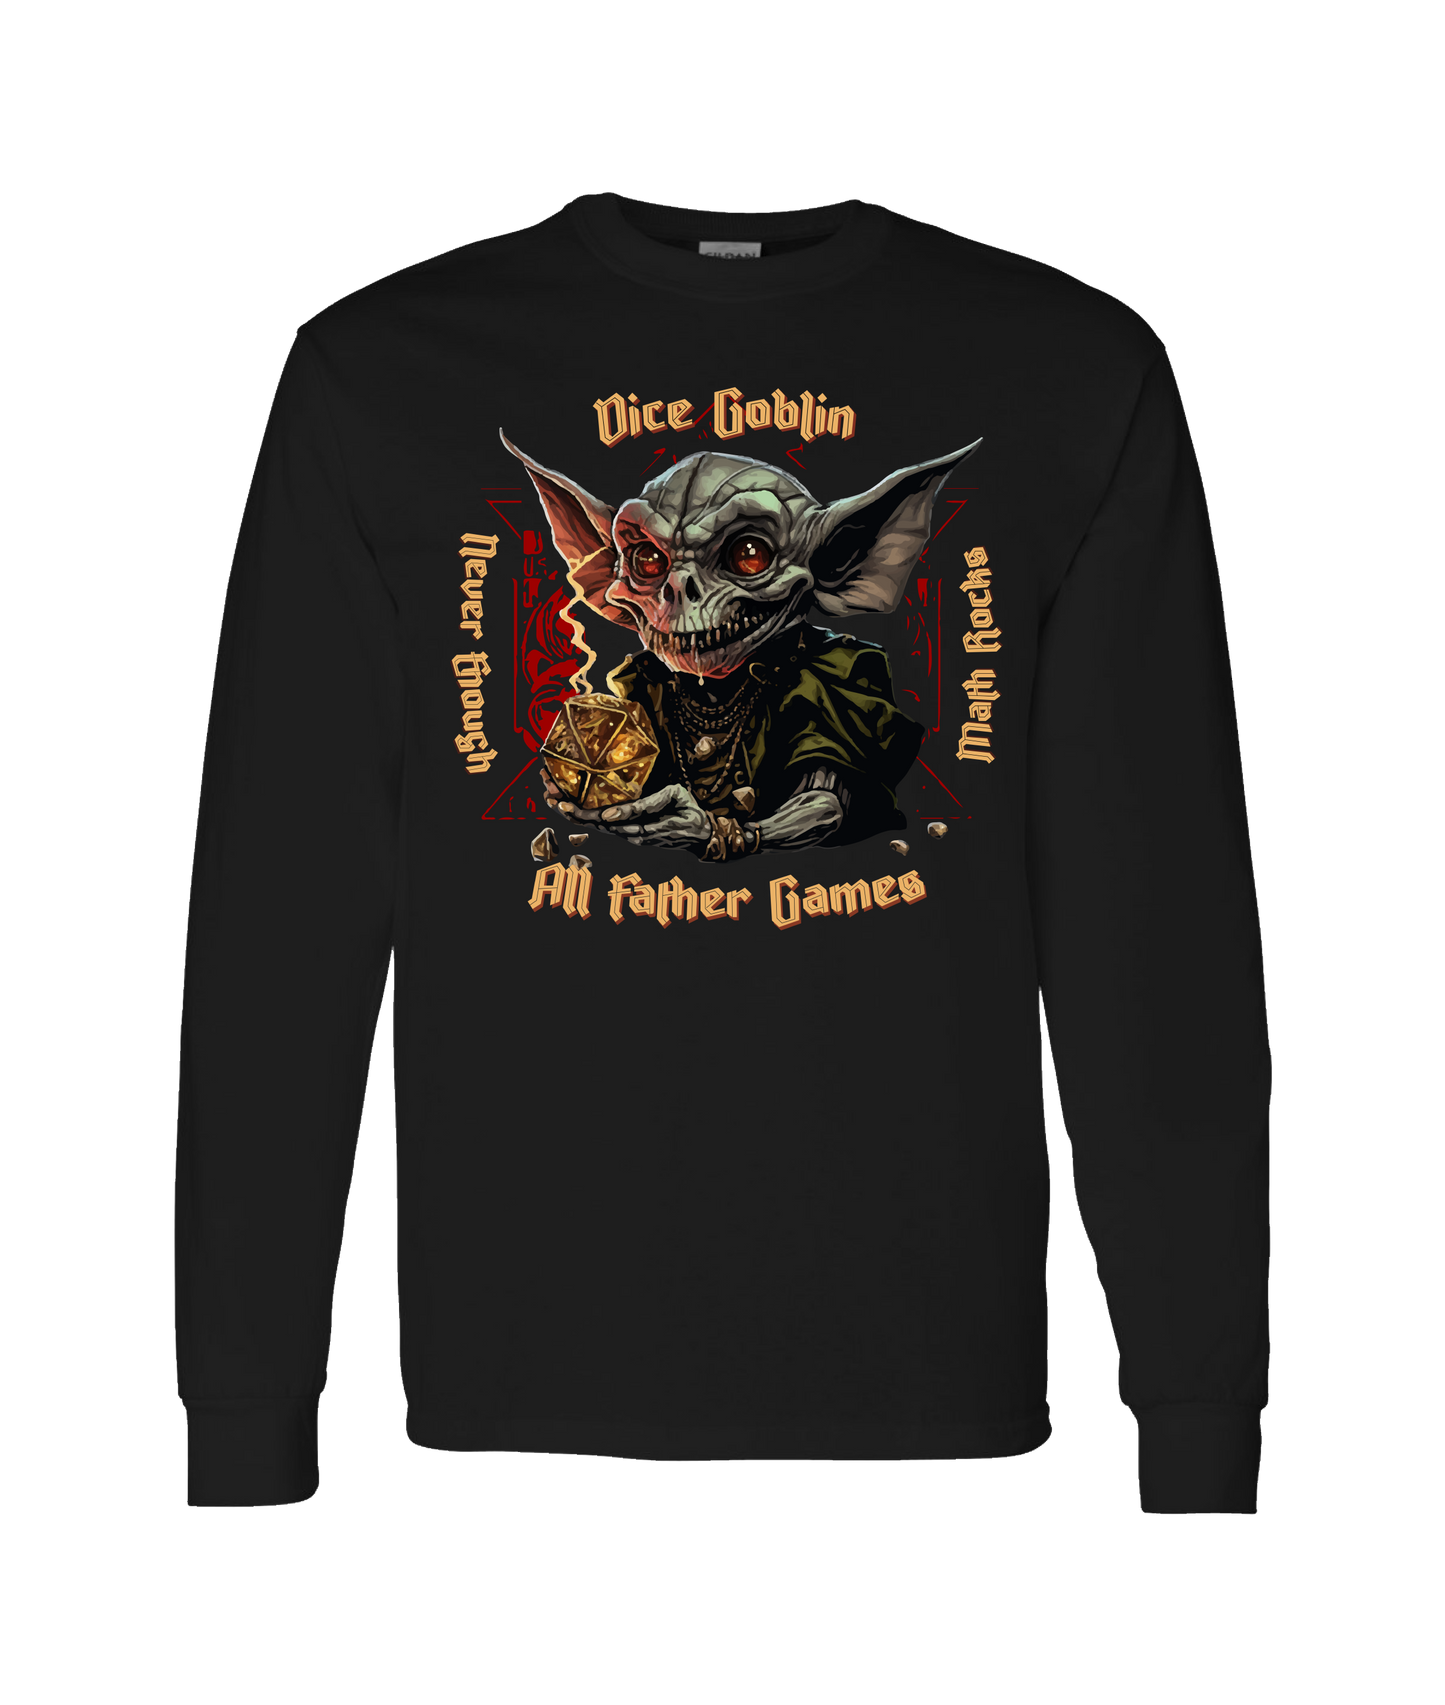 All Father Games - DICE GOBLIN - Black Long Sleeve T